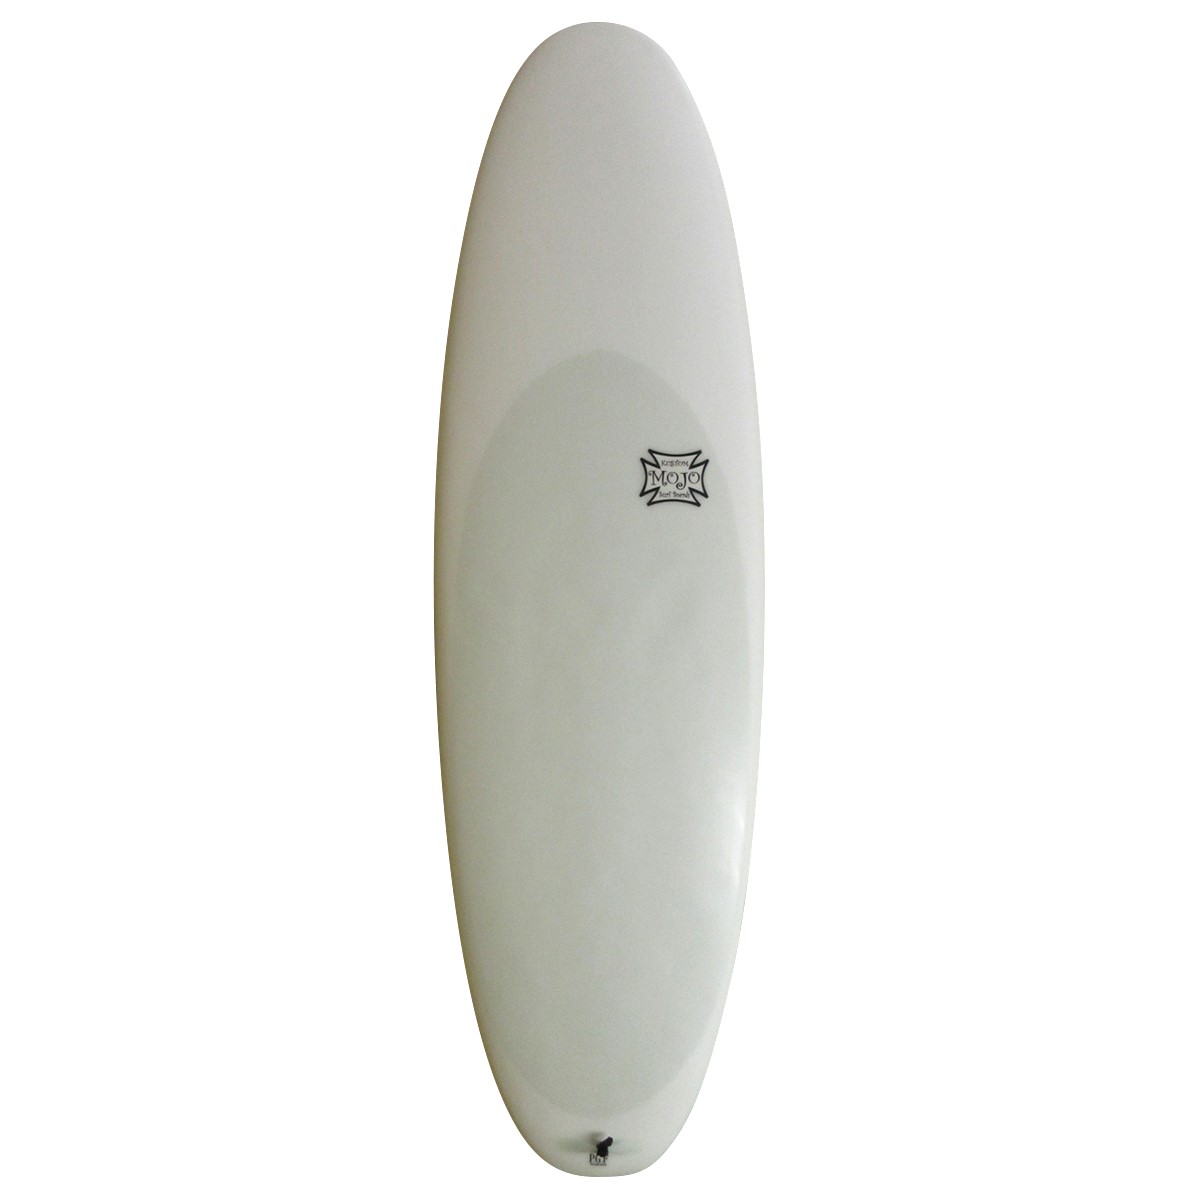 MOJO KUSTOM SURFBOARDS / MOJO KUSTOM SURFBOARDS / EPS DOUBLE ENDER 5`8